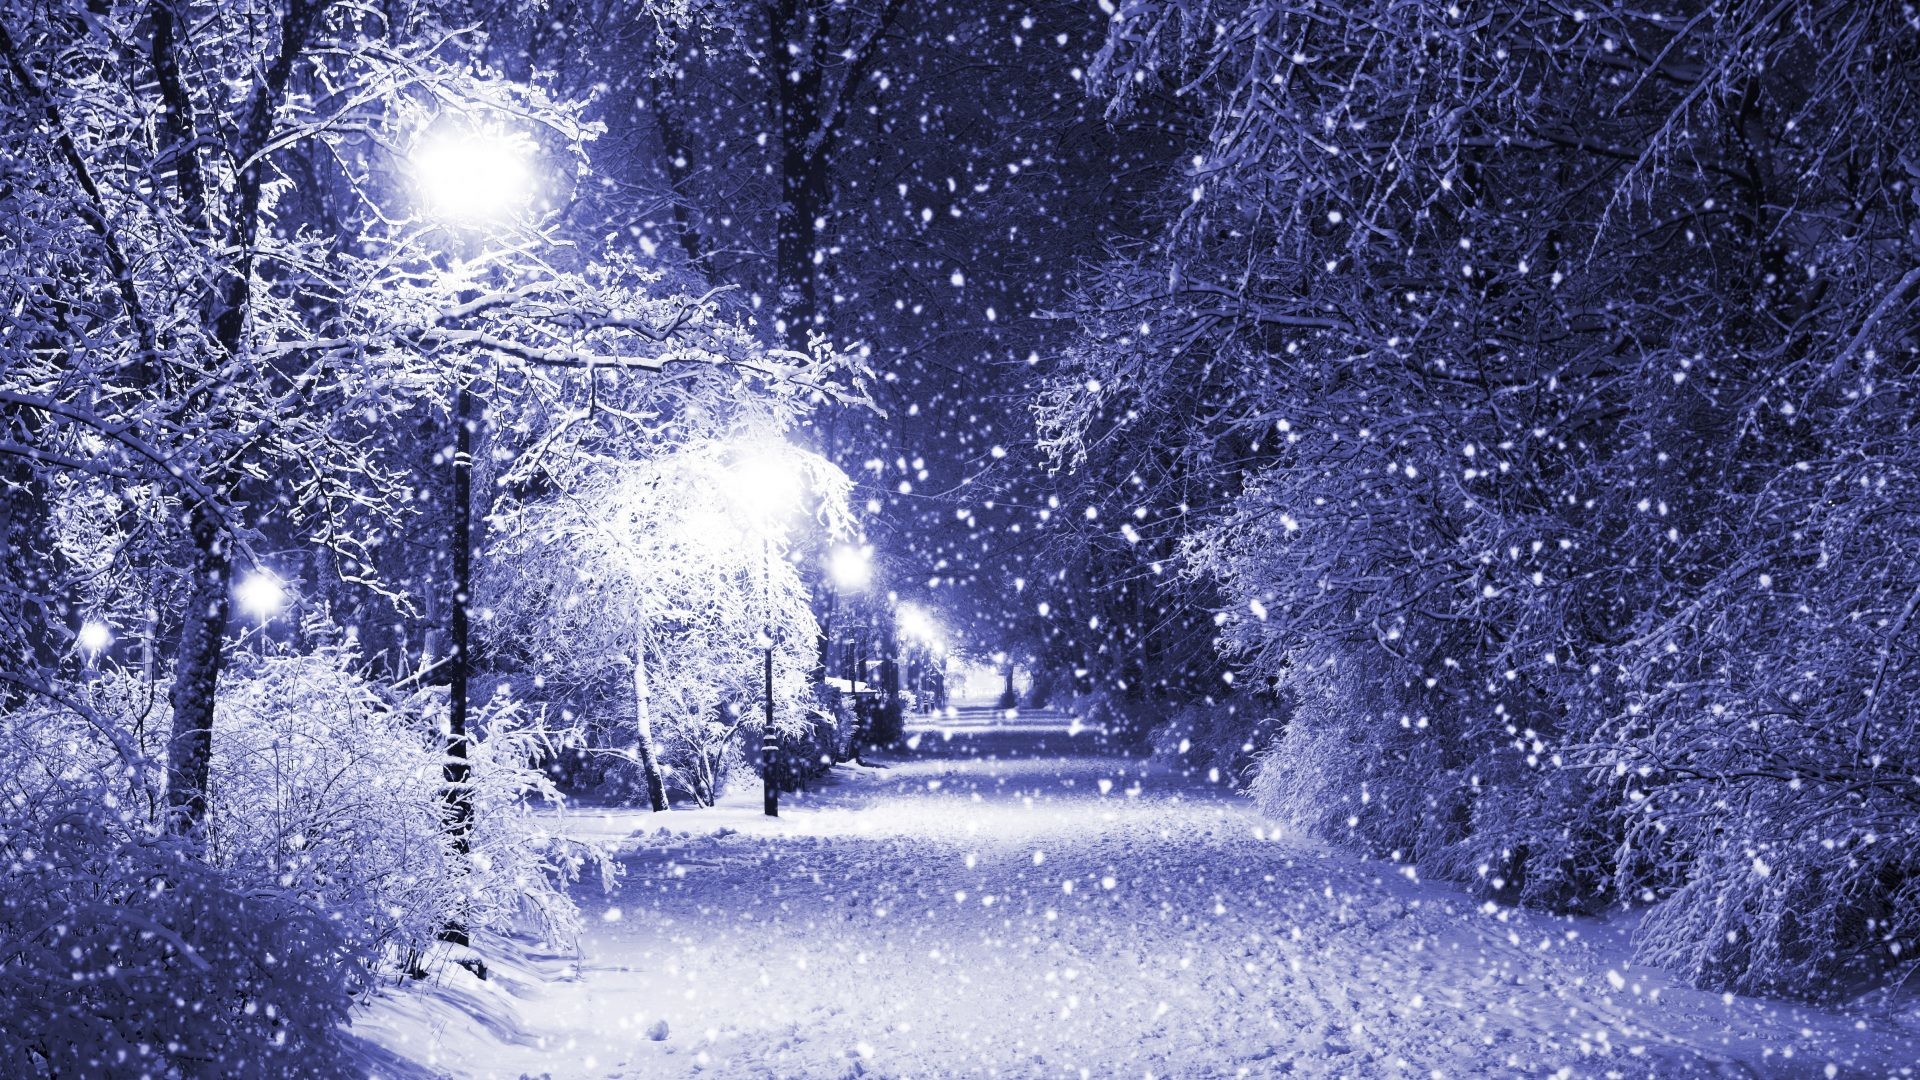 1920x1080 Merry Tag - Quiet Merry Snow Evening Christmas Eve Peaceful Night Park  Nature Lights White Forever